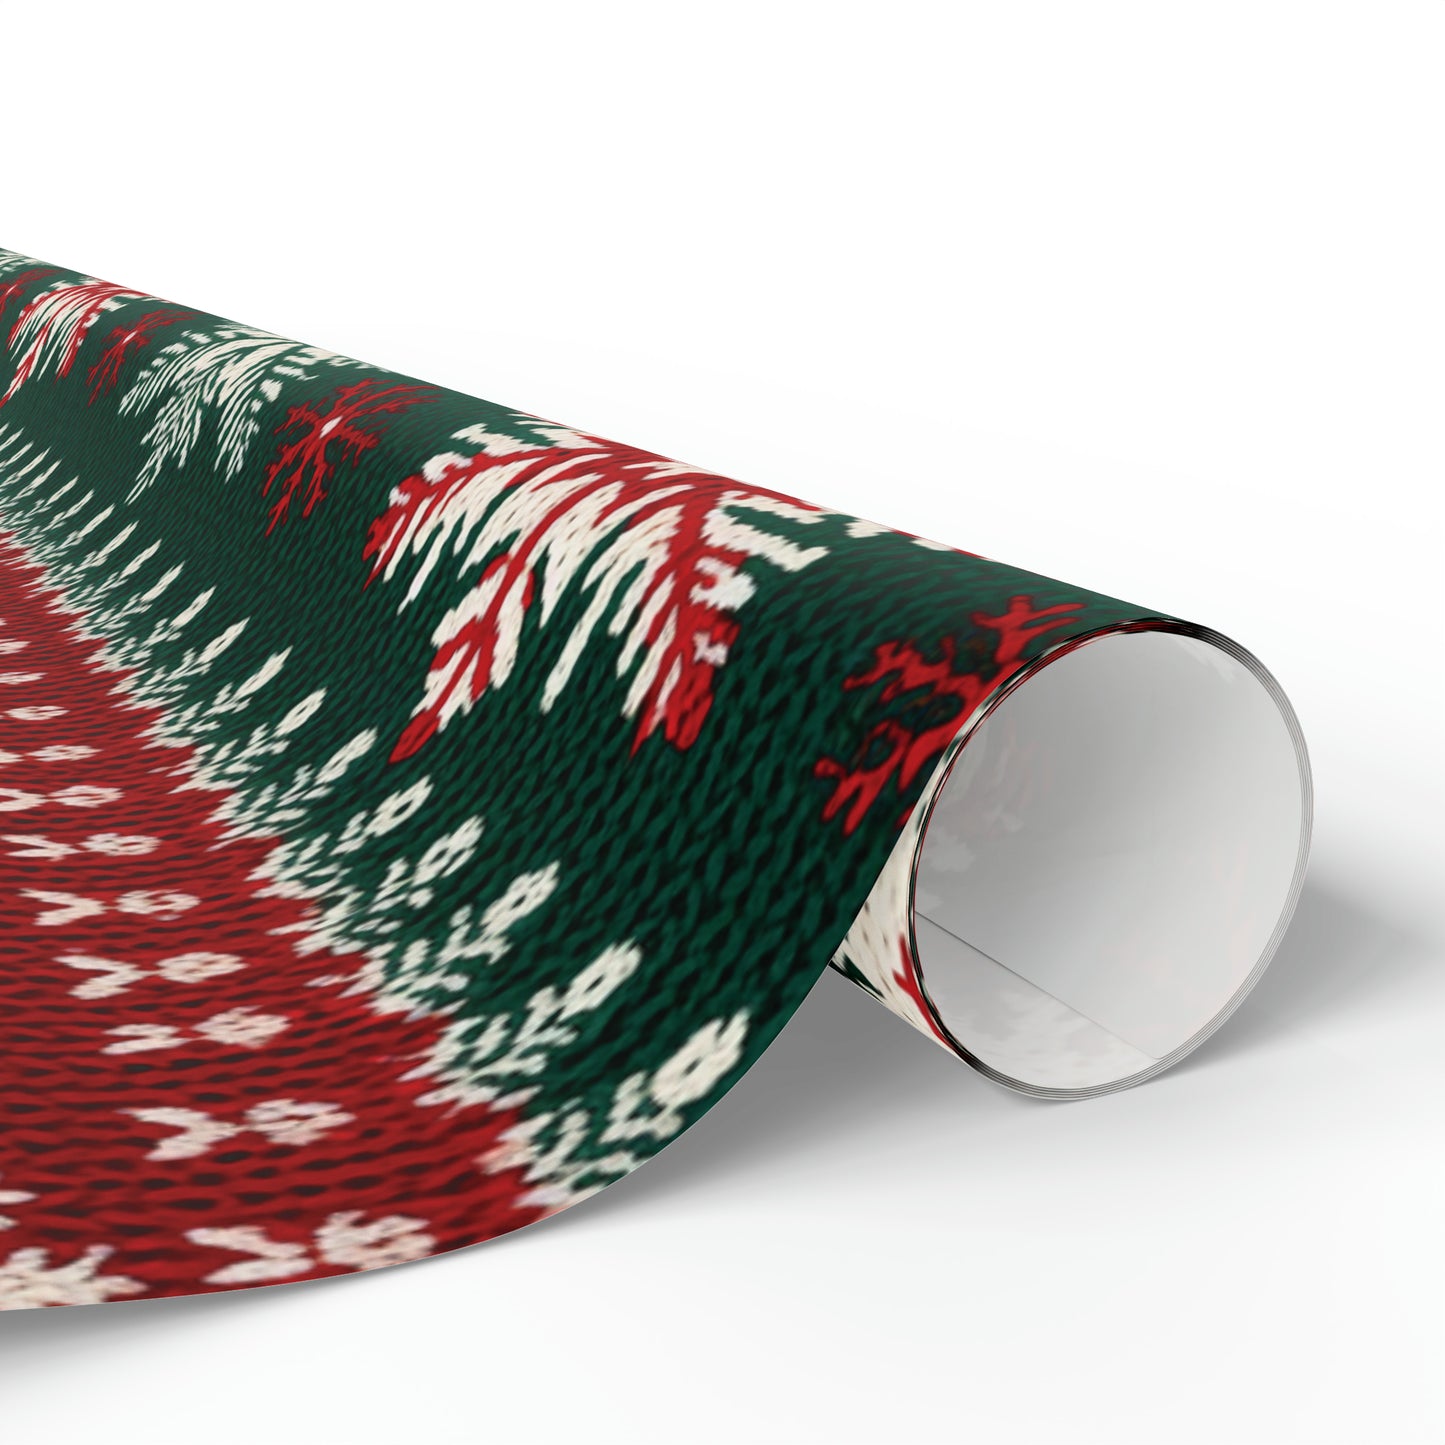 Pretty Ugly Christmas Sweater Wrapping Paper Ugly Christmas Sweater Gift Wrap